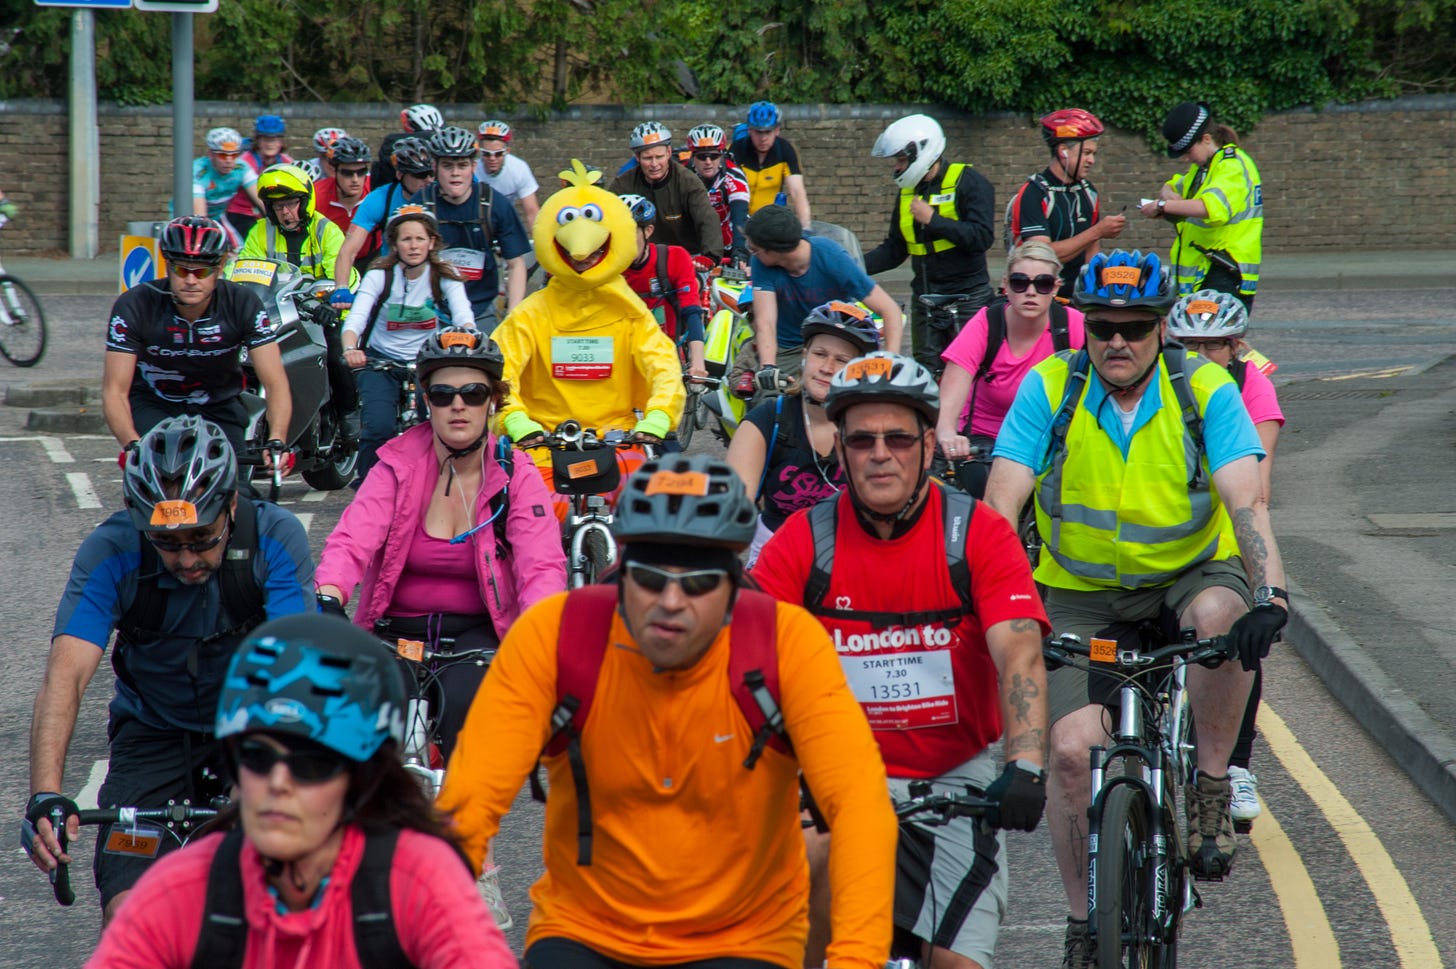 A colorful group of cyclists are driving torwards the camera. While most people are wearing standard cycling attire, one person is masked as Big Bird of Sesame Street.